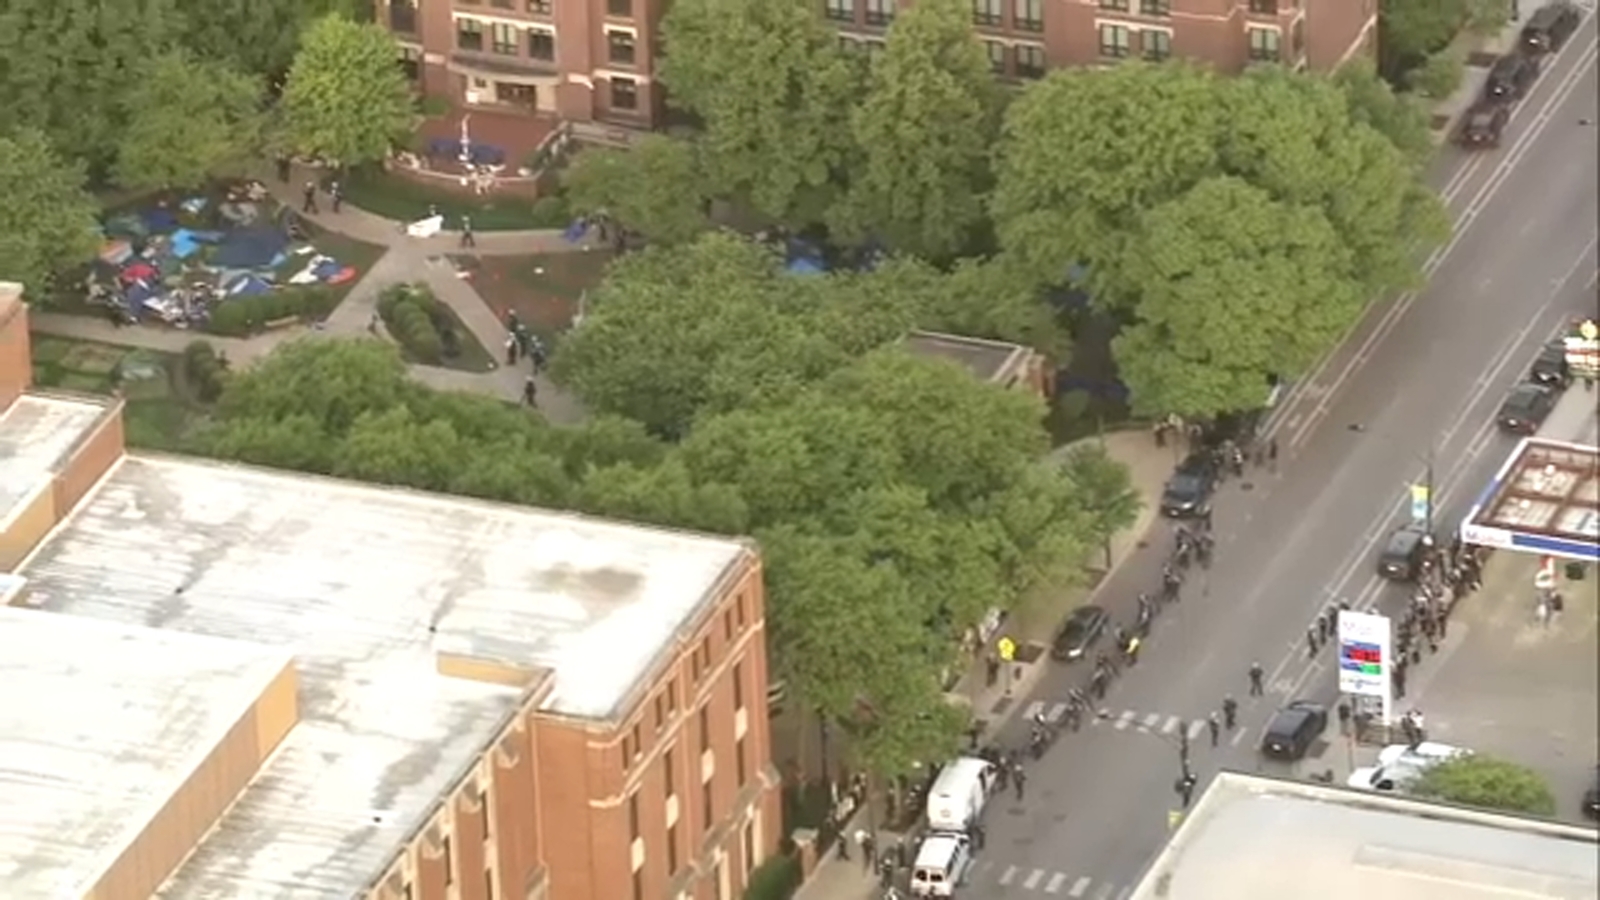 Chicago police clear out DePaul University pro-Palestinian protest encampment in Lincoln Park after over 2 weeks | LIVE [Video]